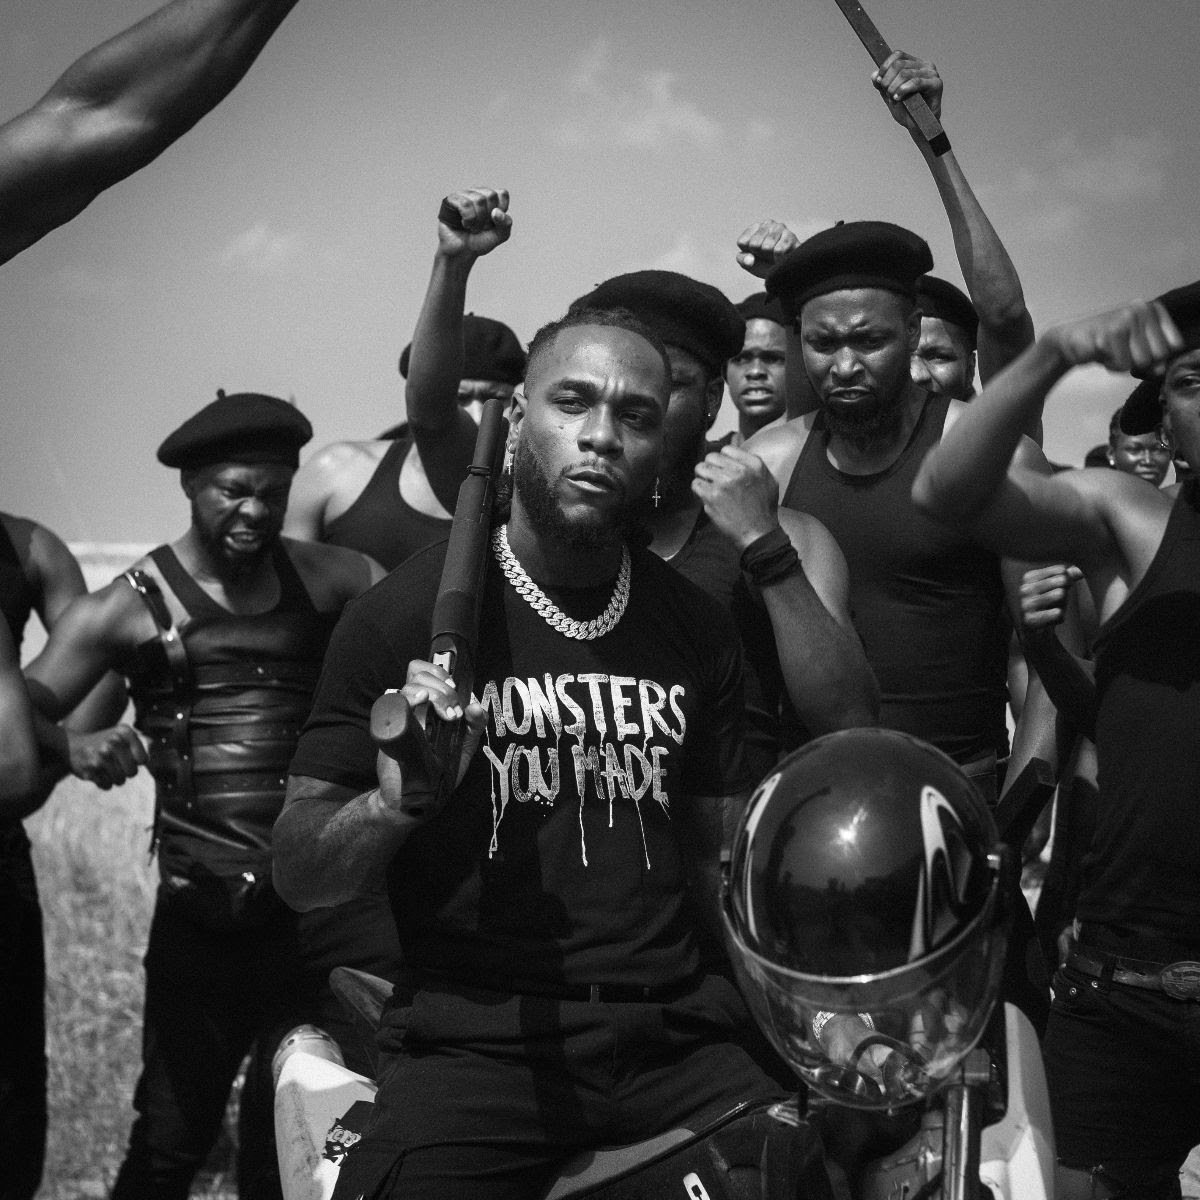 Video Burna Boy Releases The Highly-Anticipated Visuals Of "Monsters You Made" Featuring Chris Martin